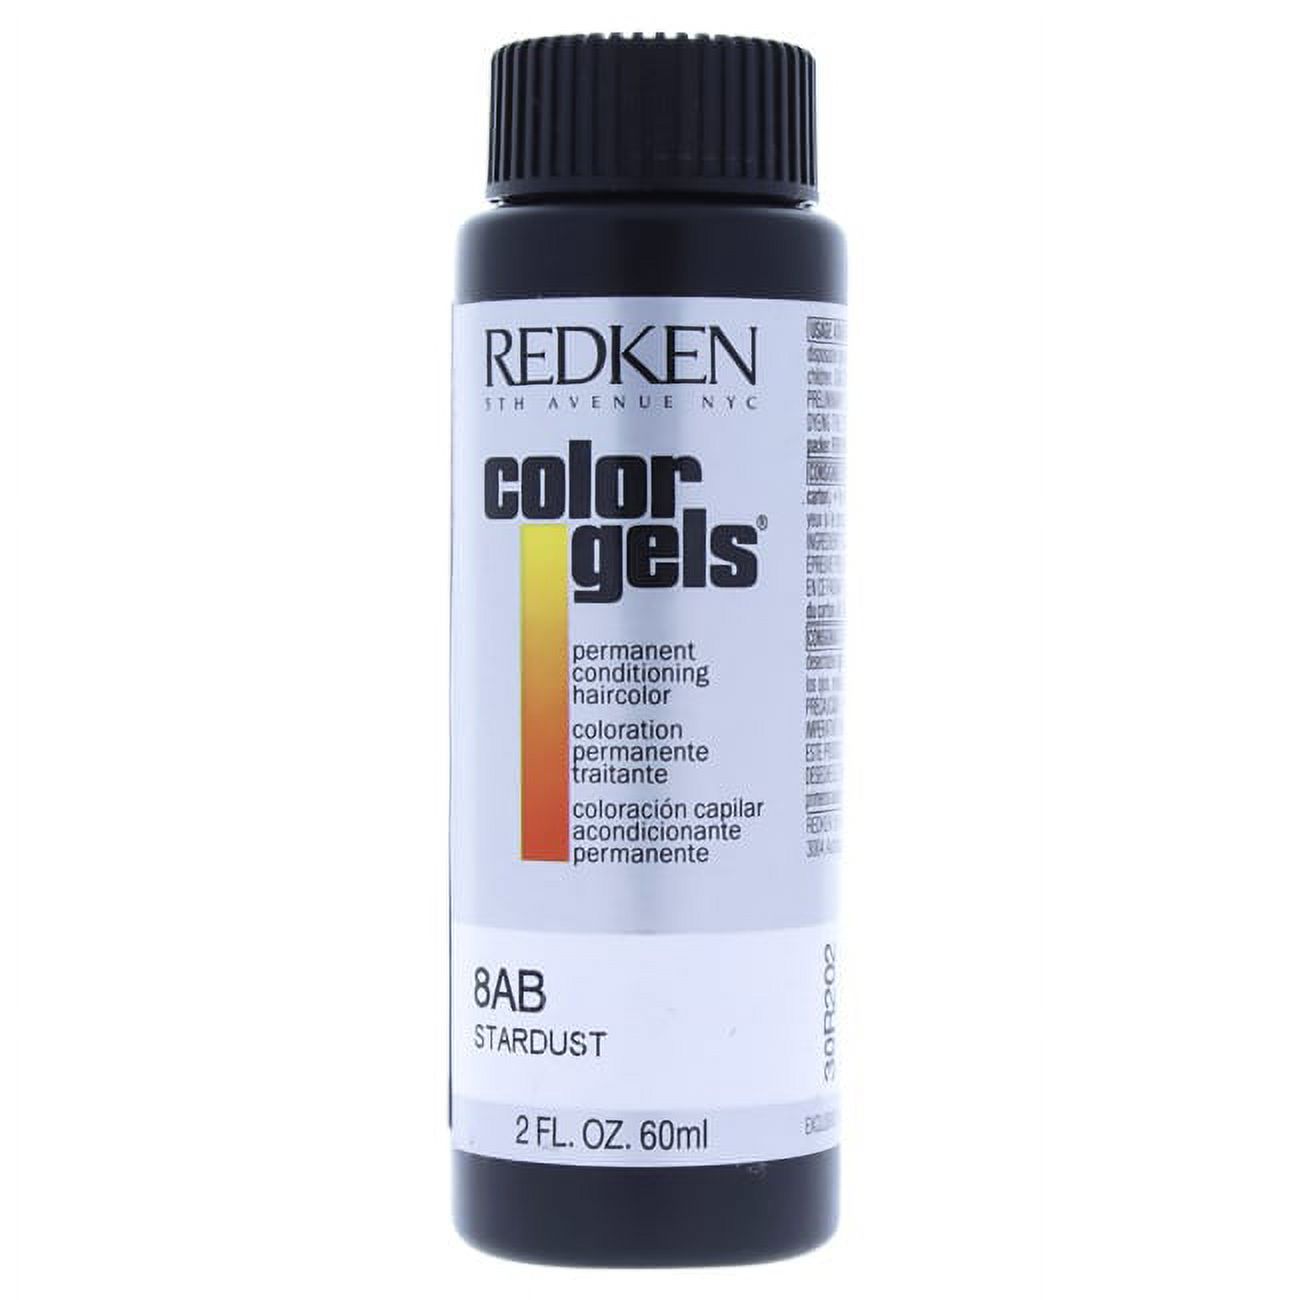 Redken Color Gels Permanent Conditioning Haircolor - Color : 8AB-Stardust - image 2 of 2